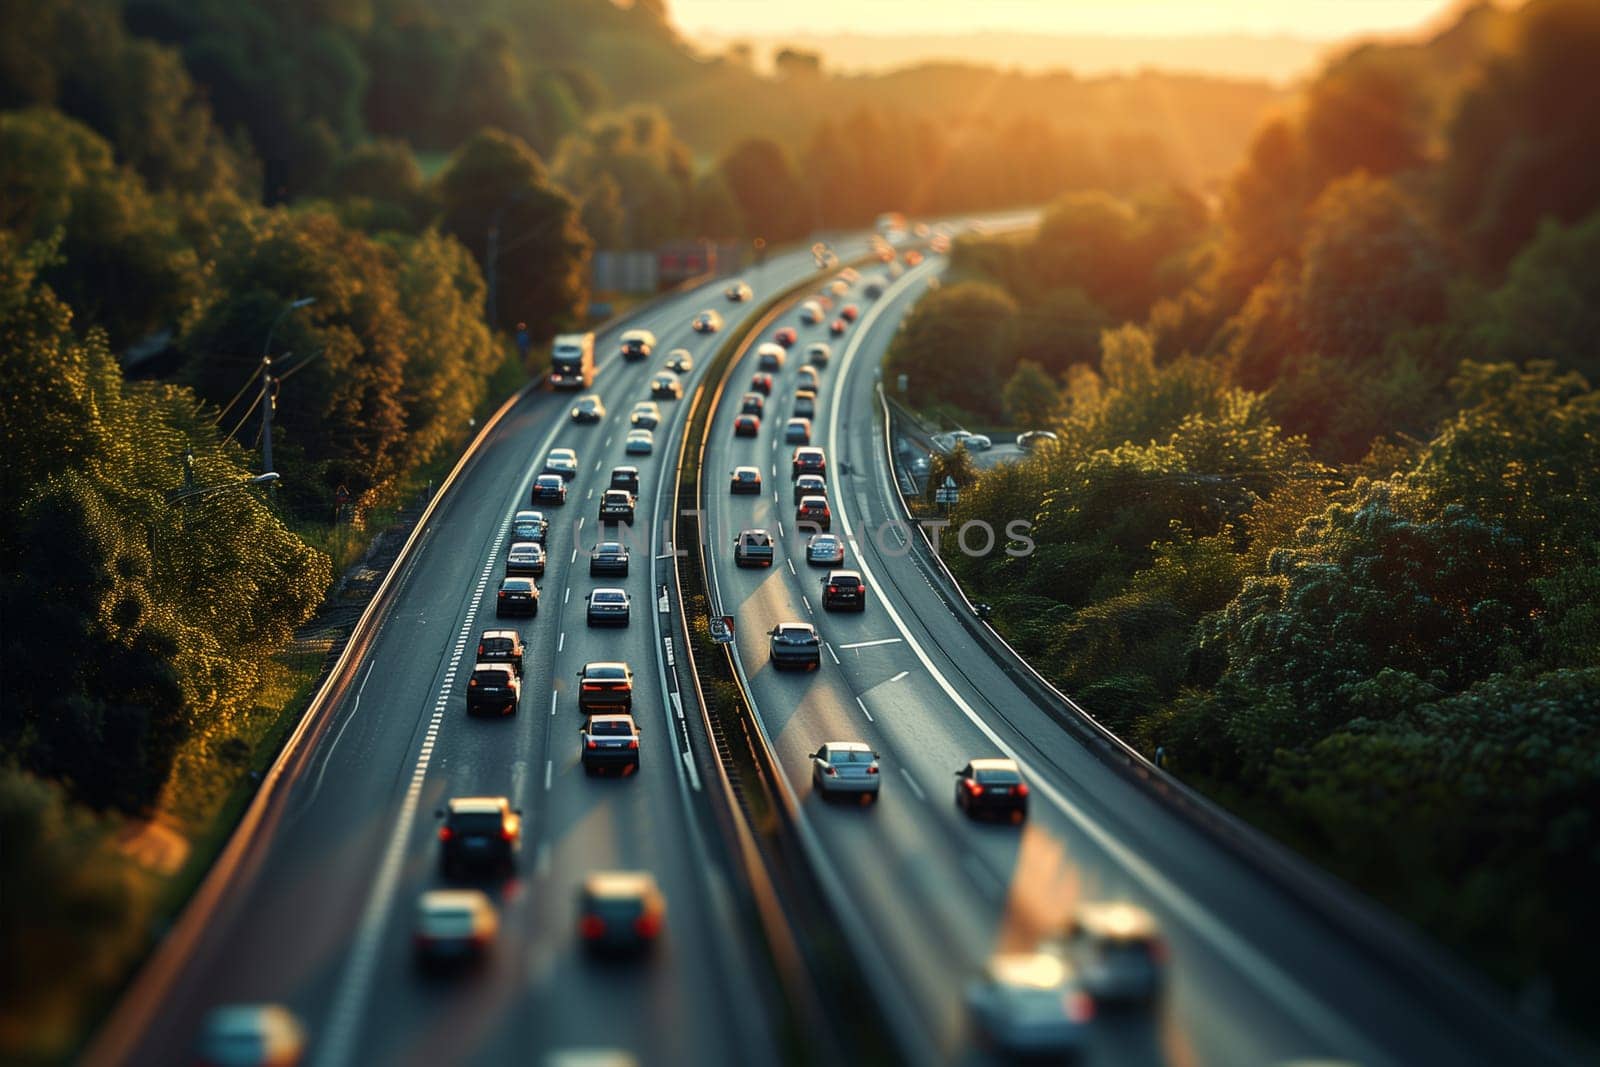 A busy highway filled with cars surrounded by lush green trees creating a juxtaposition of urban and natural elements.